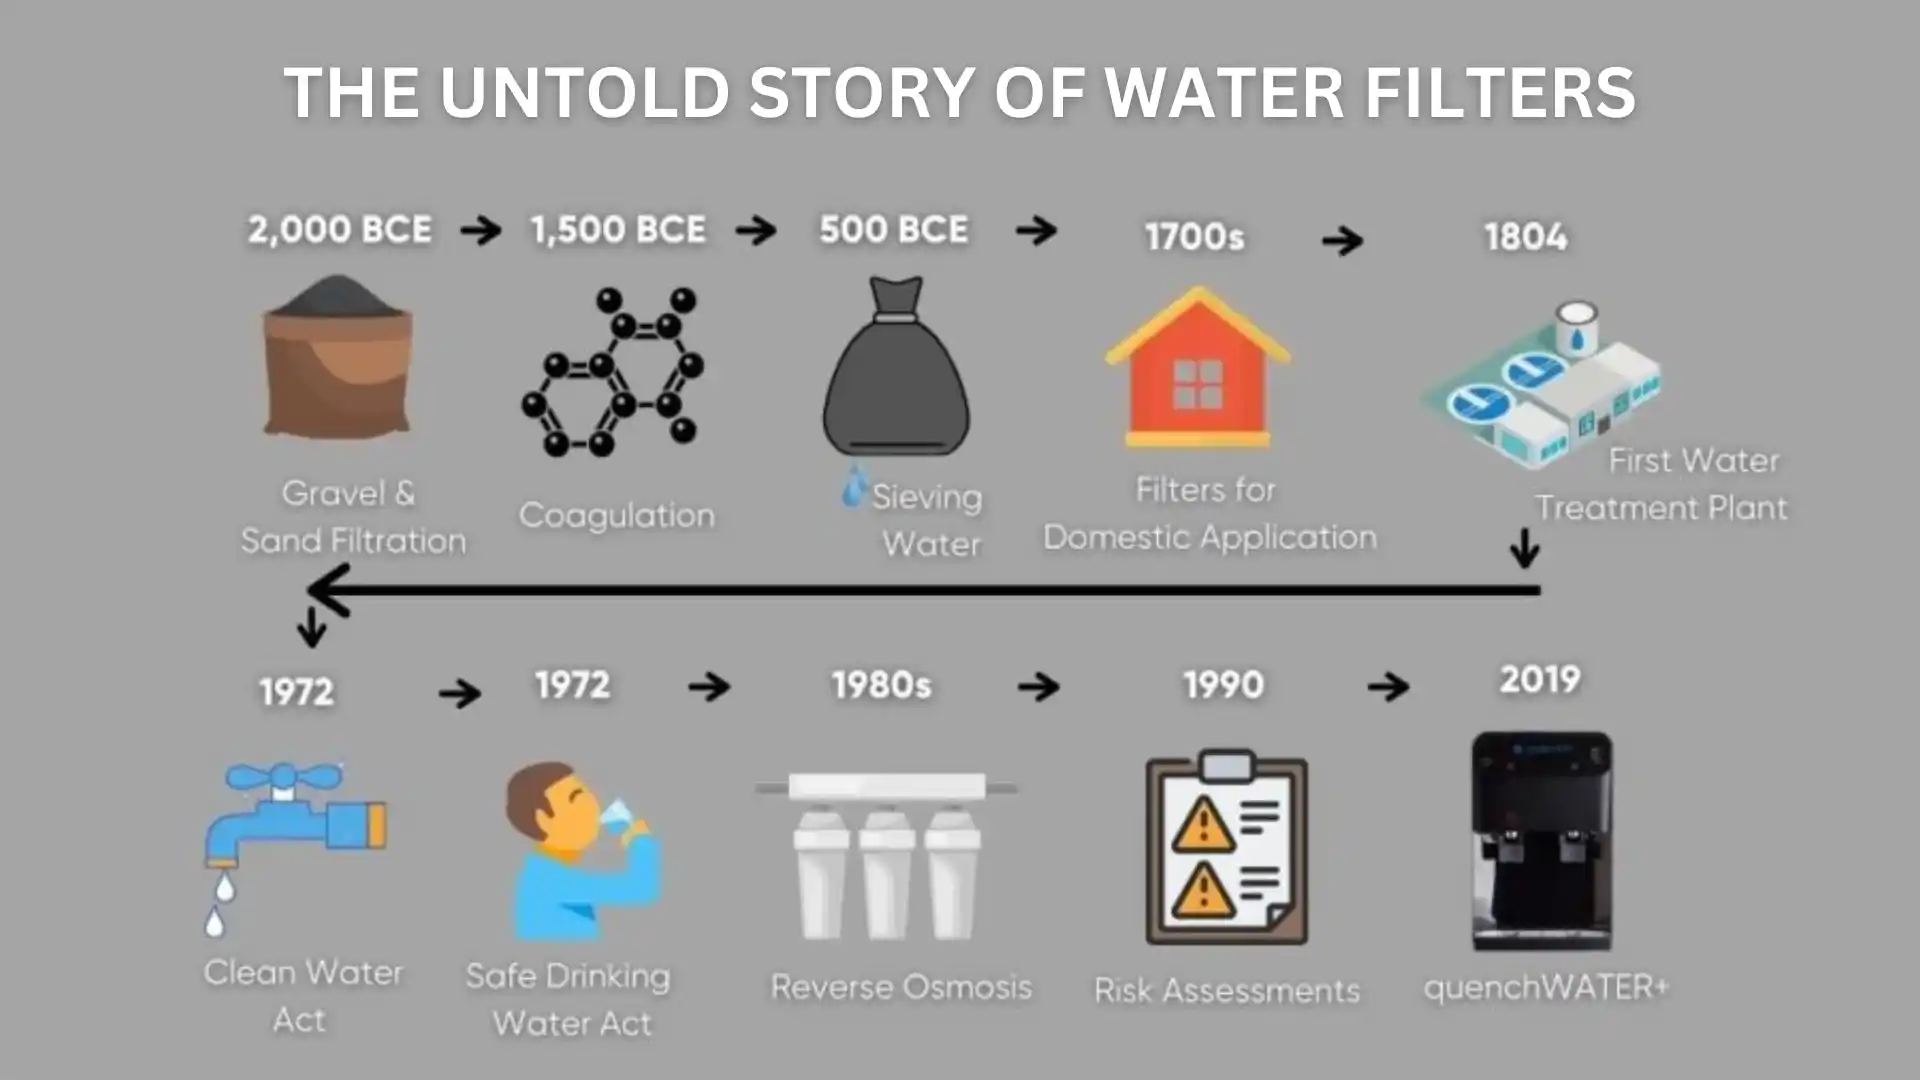 The Untold Story of Water Filters